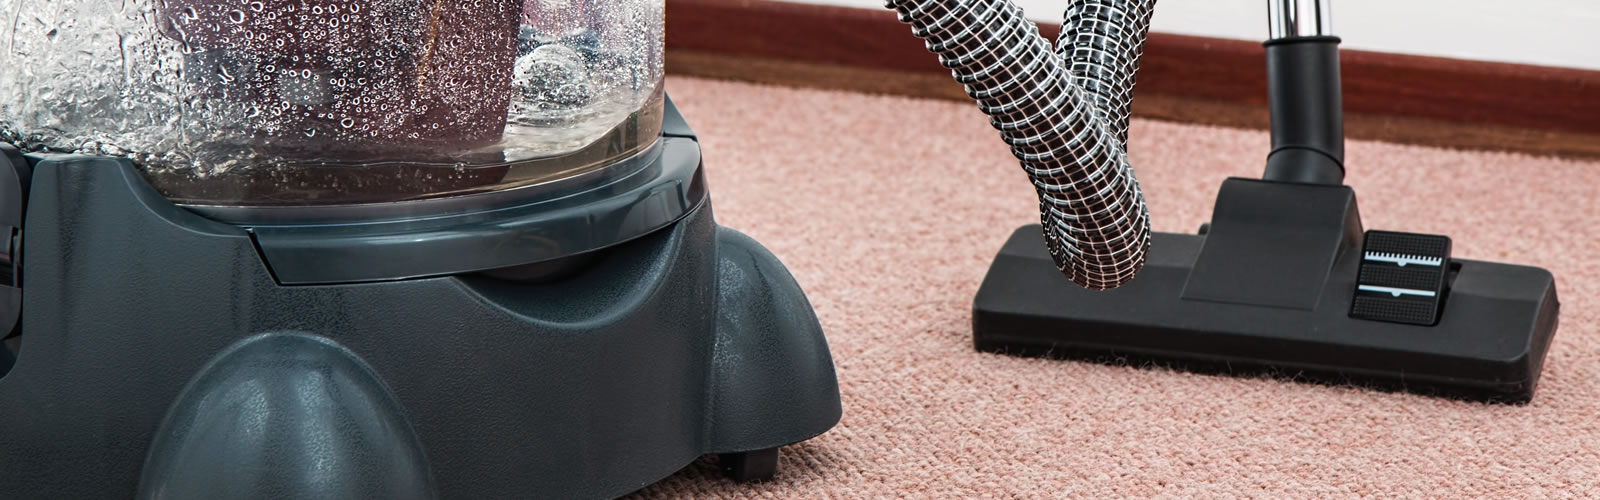 Professional carpet cleaning services Kenya